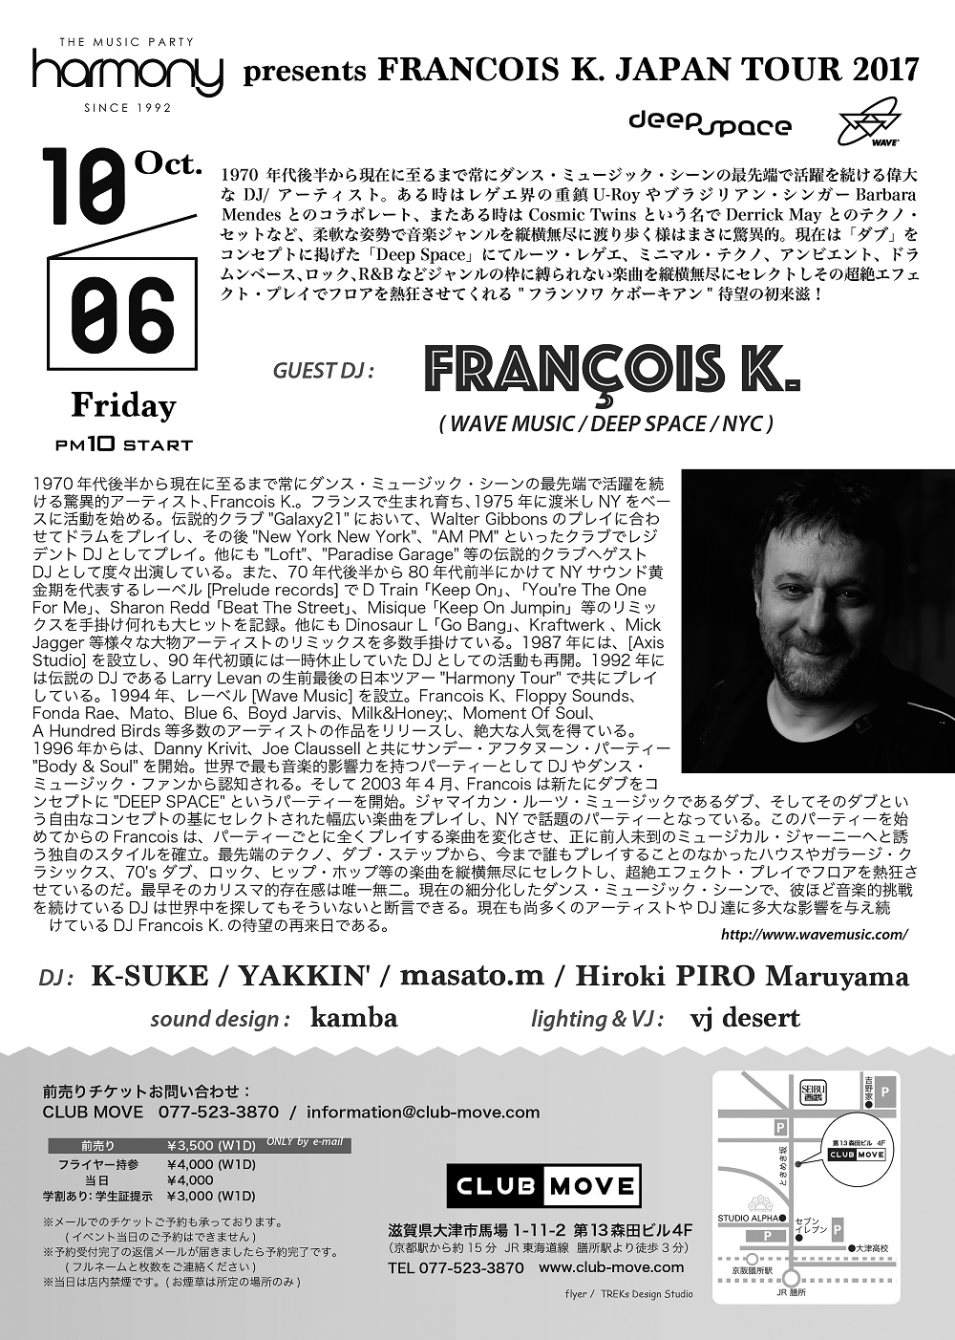 Harmony presents Francois K. Japan Tour 2017 in Club Move 滋賀 - フライヤー裏